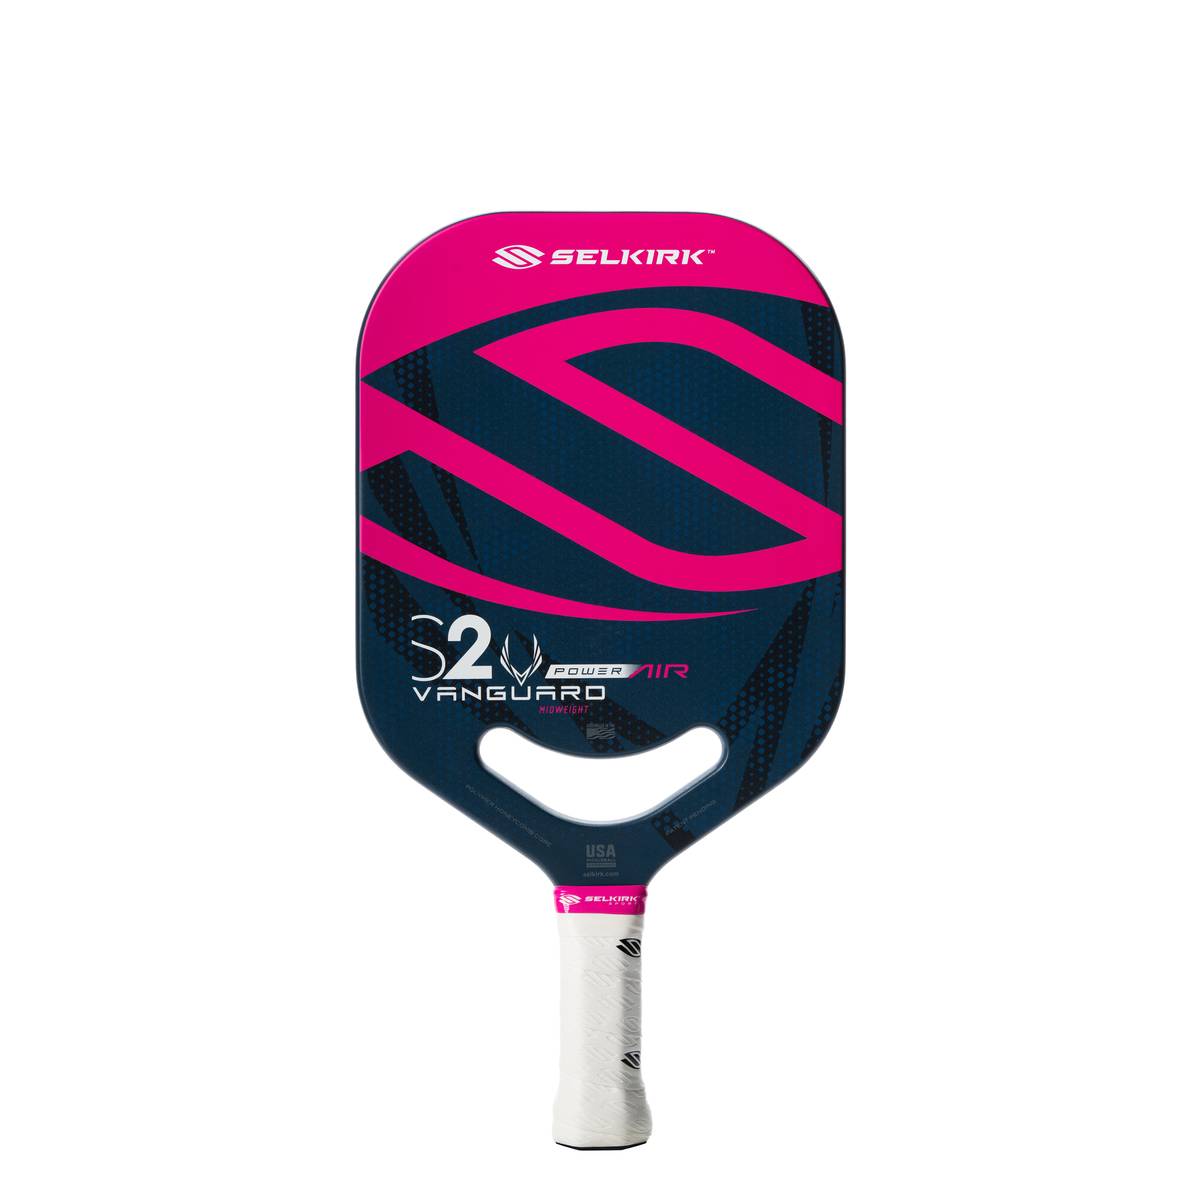 A Selkirk Power Air S2 Pickleball Paddle with a pink and blue design.